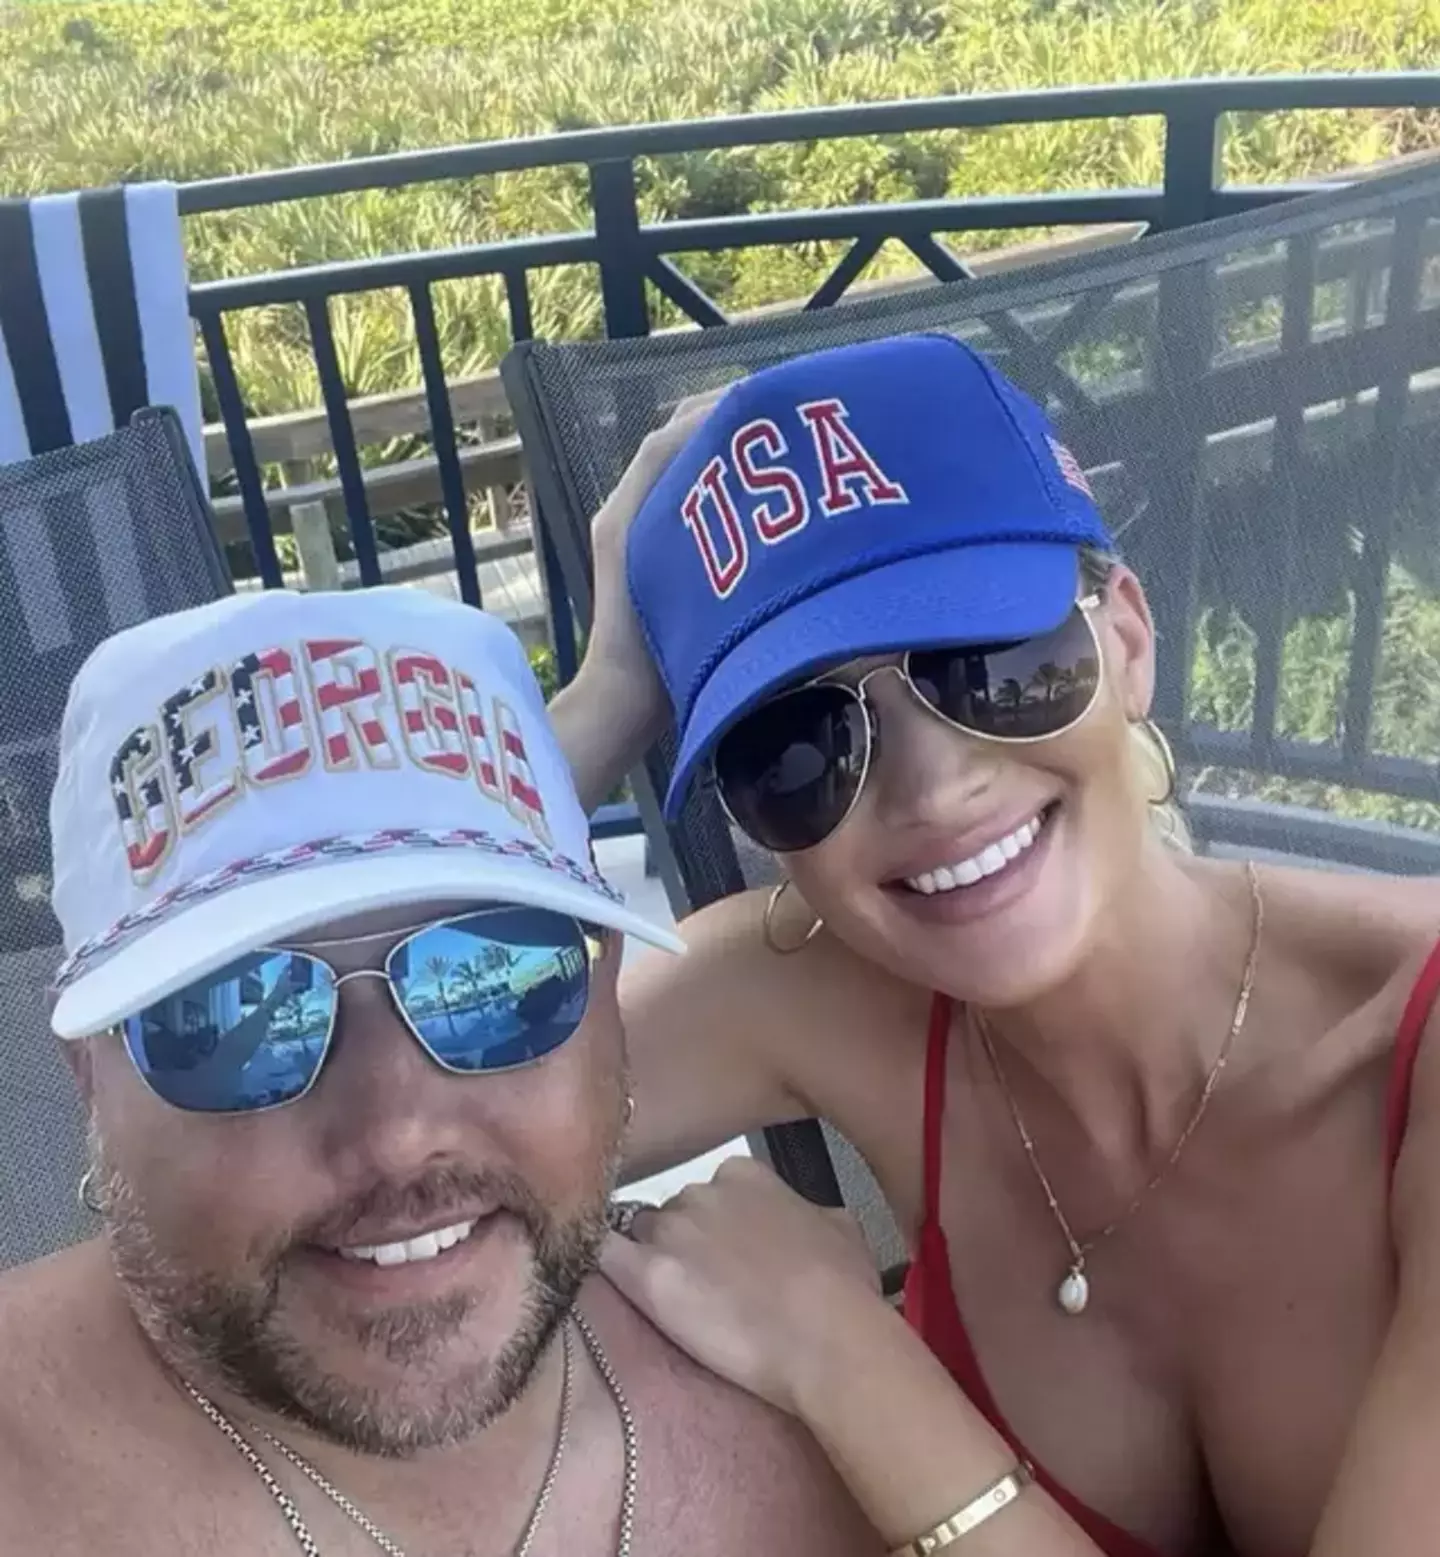 Jason Aldean's wife has backed him up in the face of backlash.